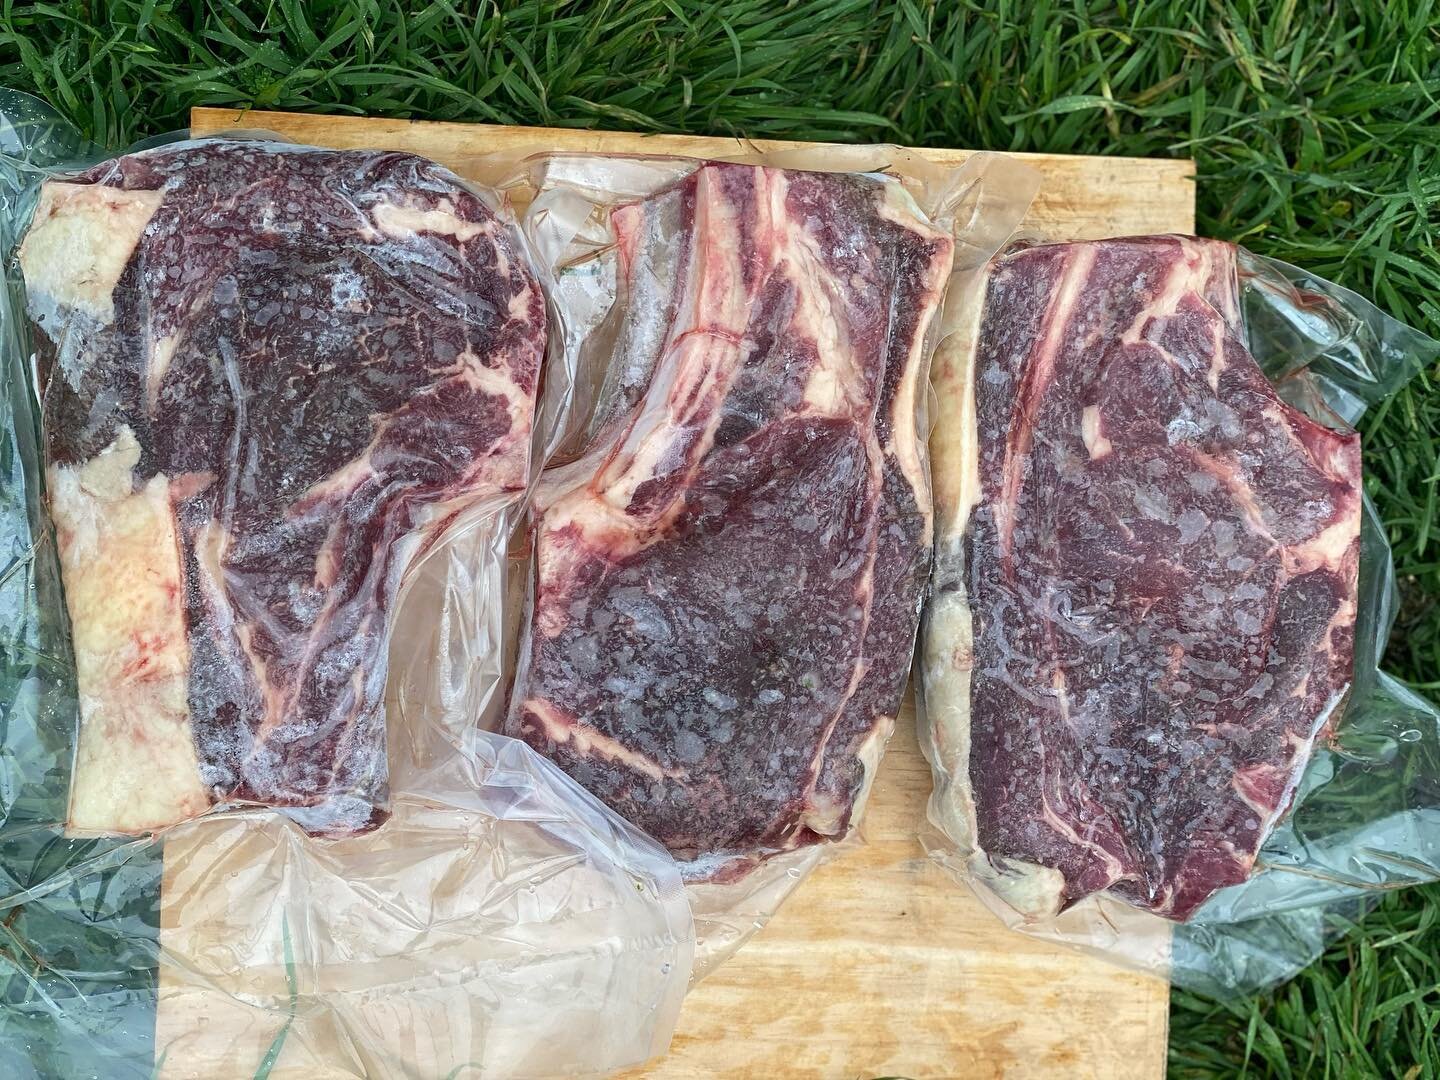 Have you read about all the health benefits of pasture raised beef ?

Take a look at these beautiful mouthwatering cuts!🥩🥩🥩Ribeyes, Tri-tip, and a Brisket we just packed for 20 lb box! 

Can you say vitamins, nutrient density, and bioavailble prot